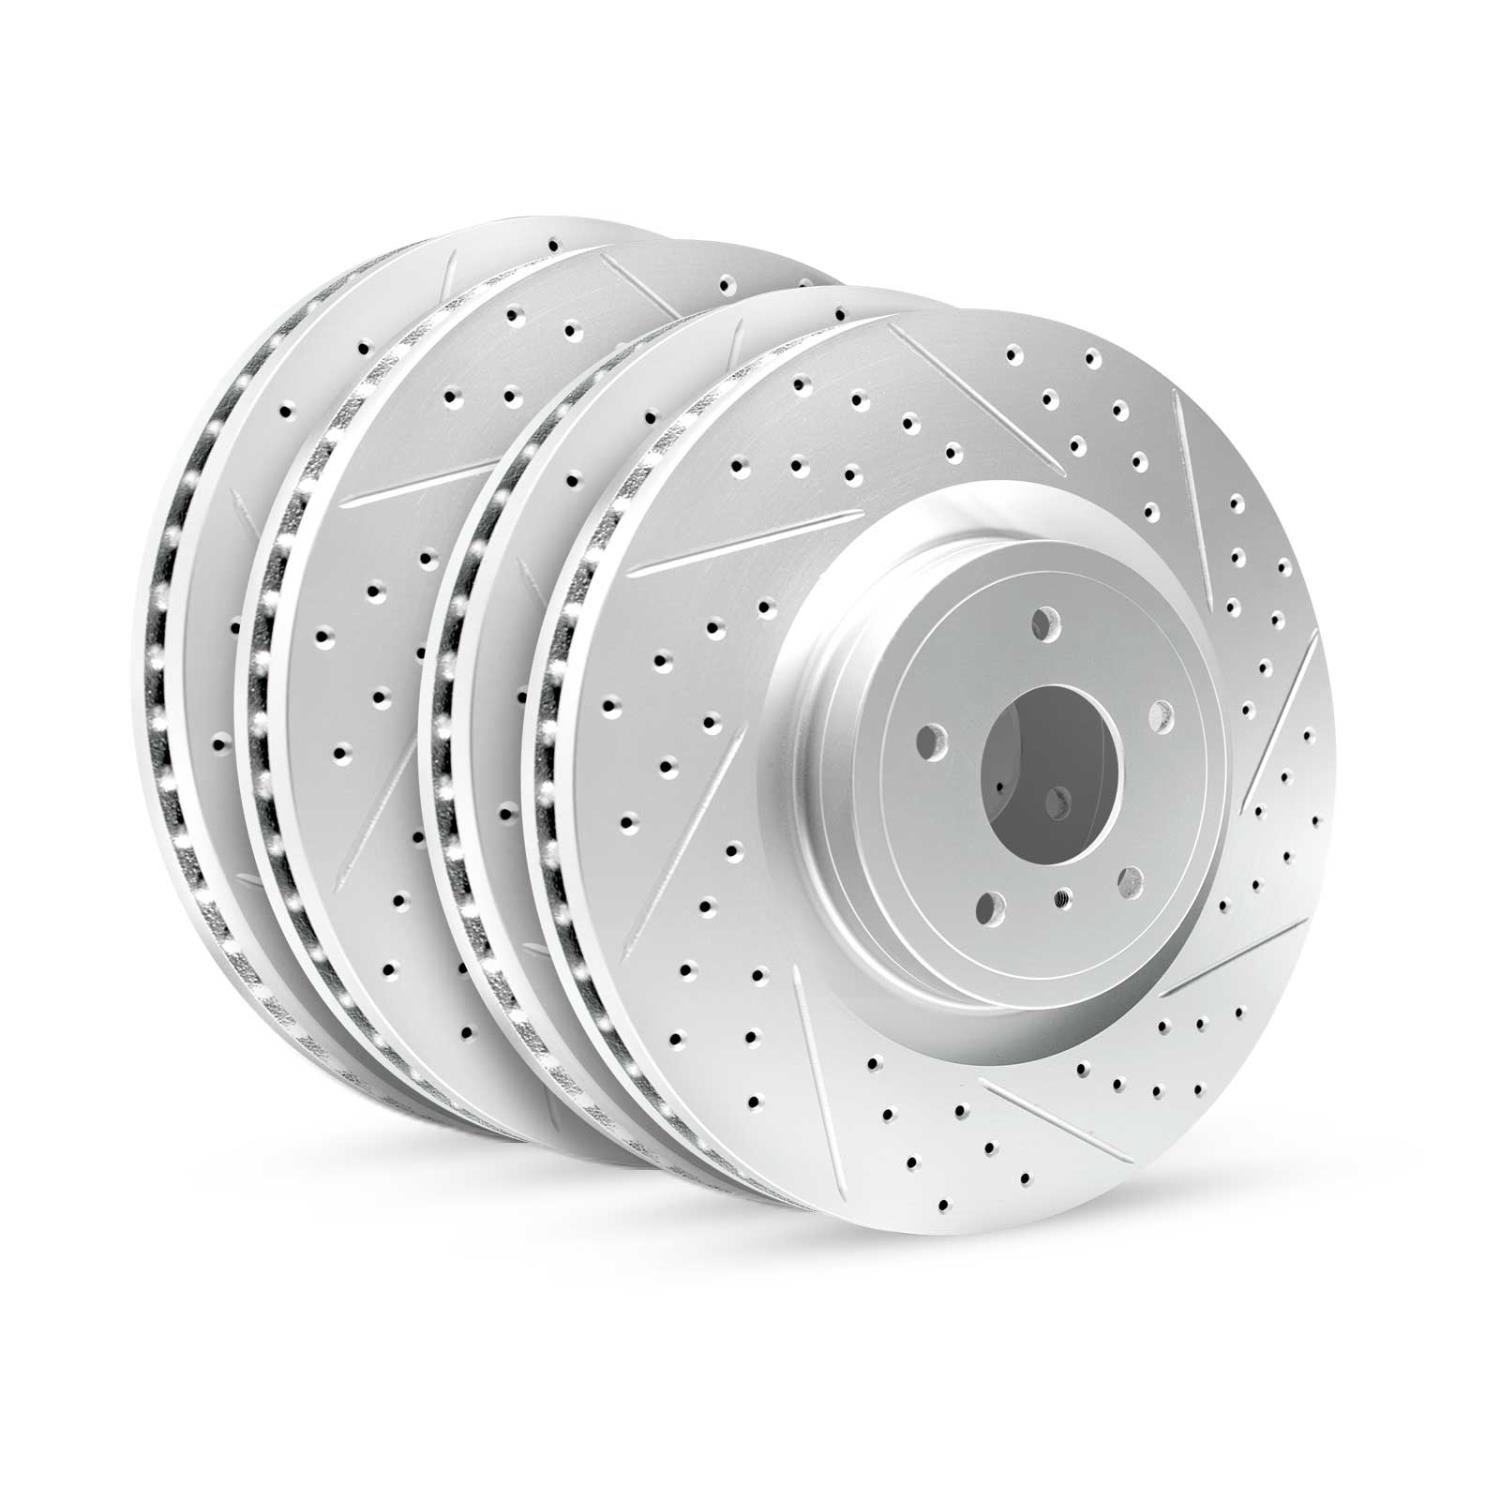 GEO-Carbon Drilled/Slotted Rotors, Fits Select Acura/Honda, Position: Front/Rear